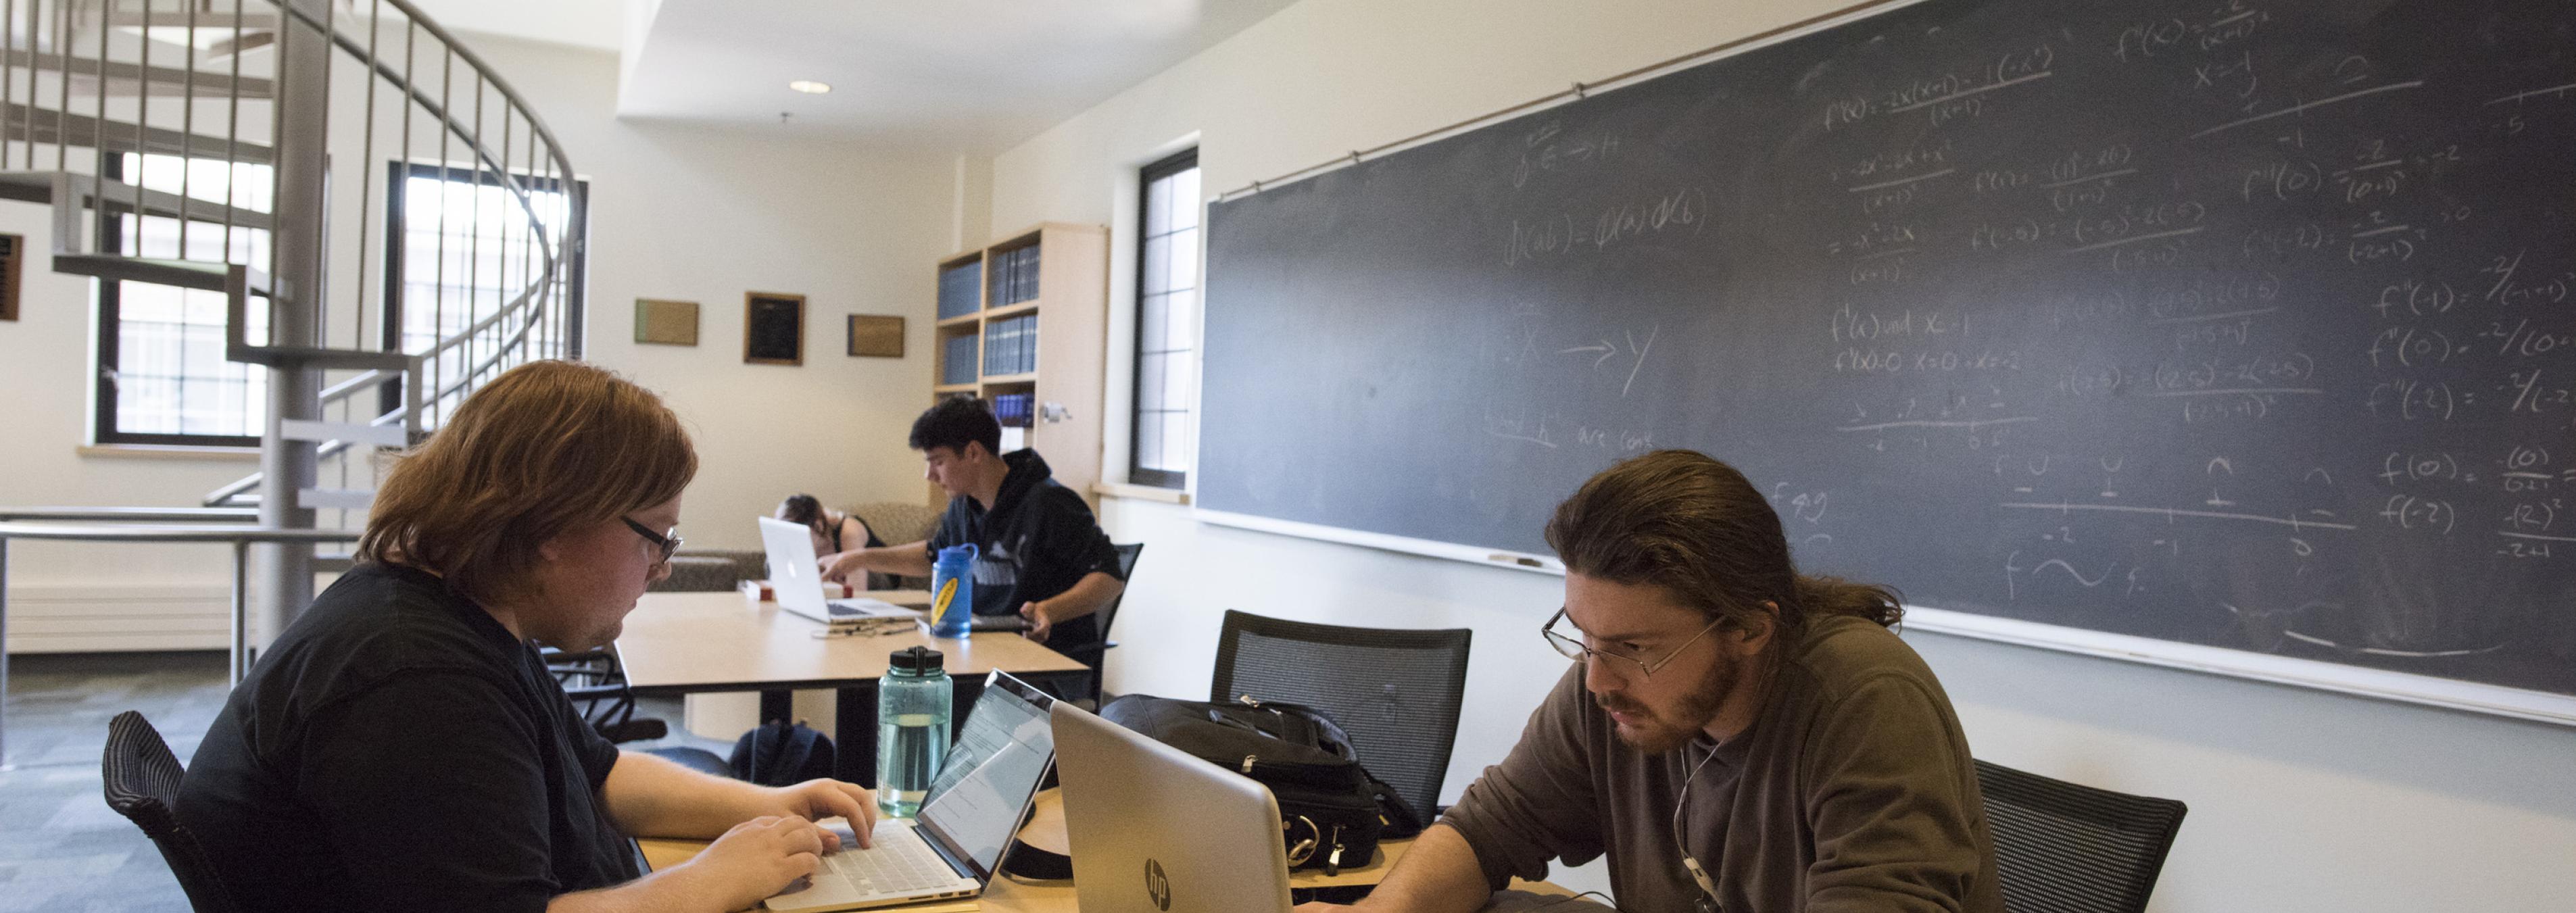 Several students work on laptops in the Mathematics Lounge in Thompson Hall.